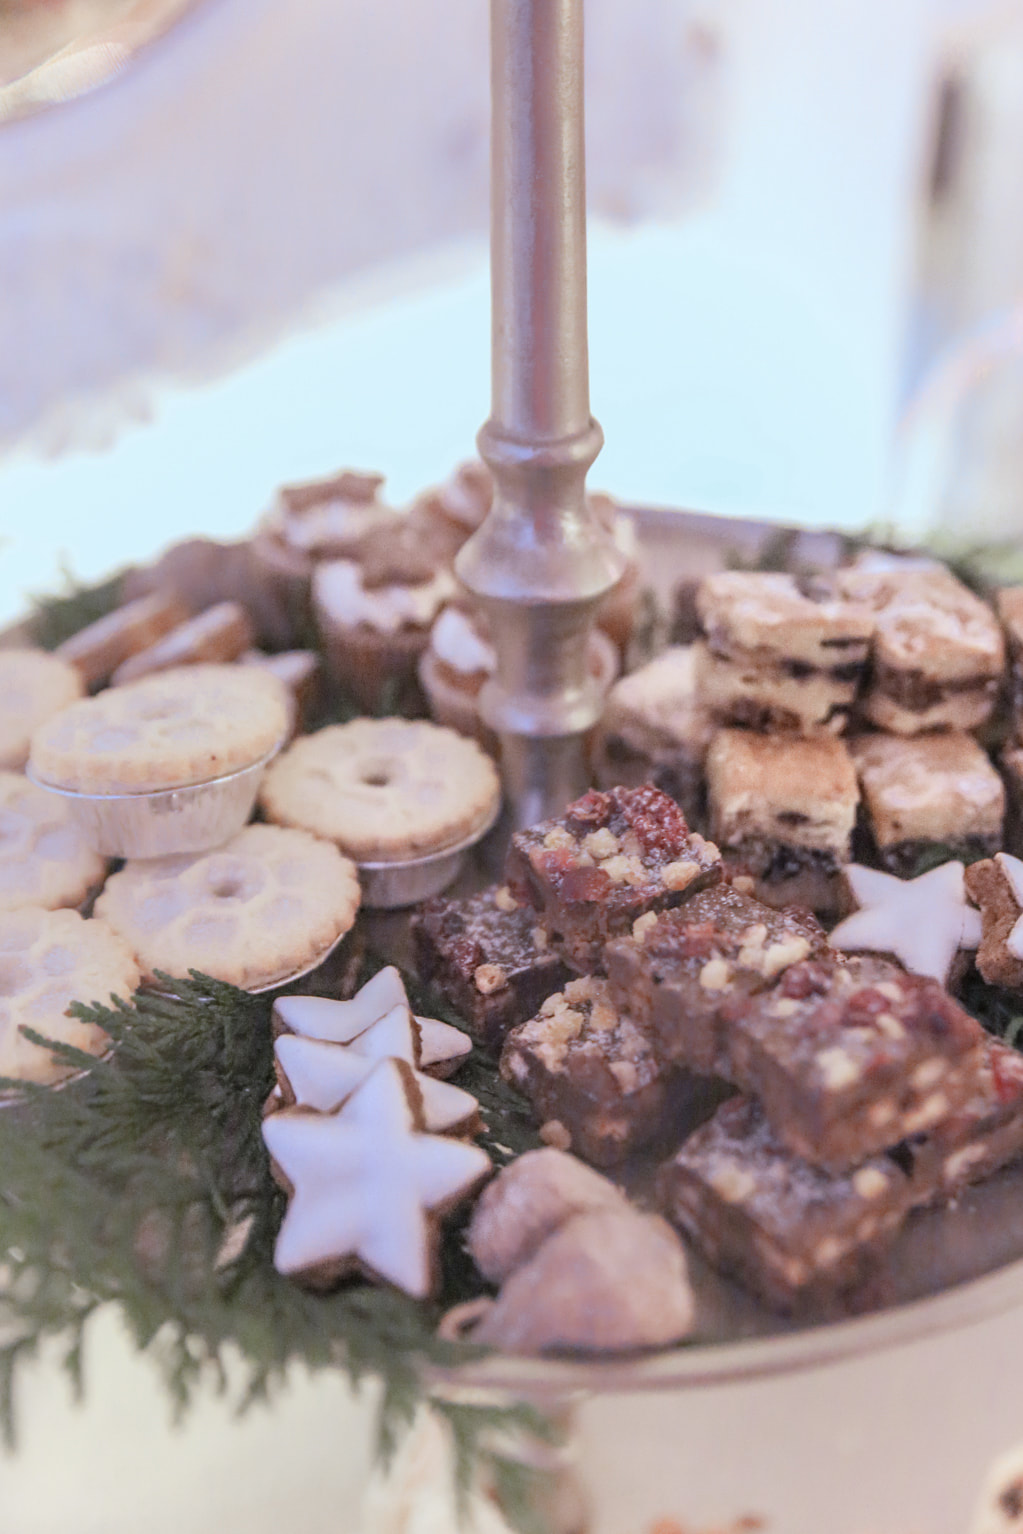 Festive Afternoon Tea at Home by The Belle Blog 